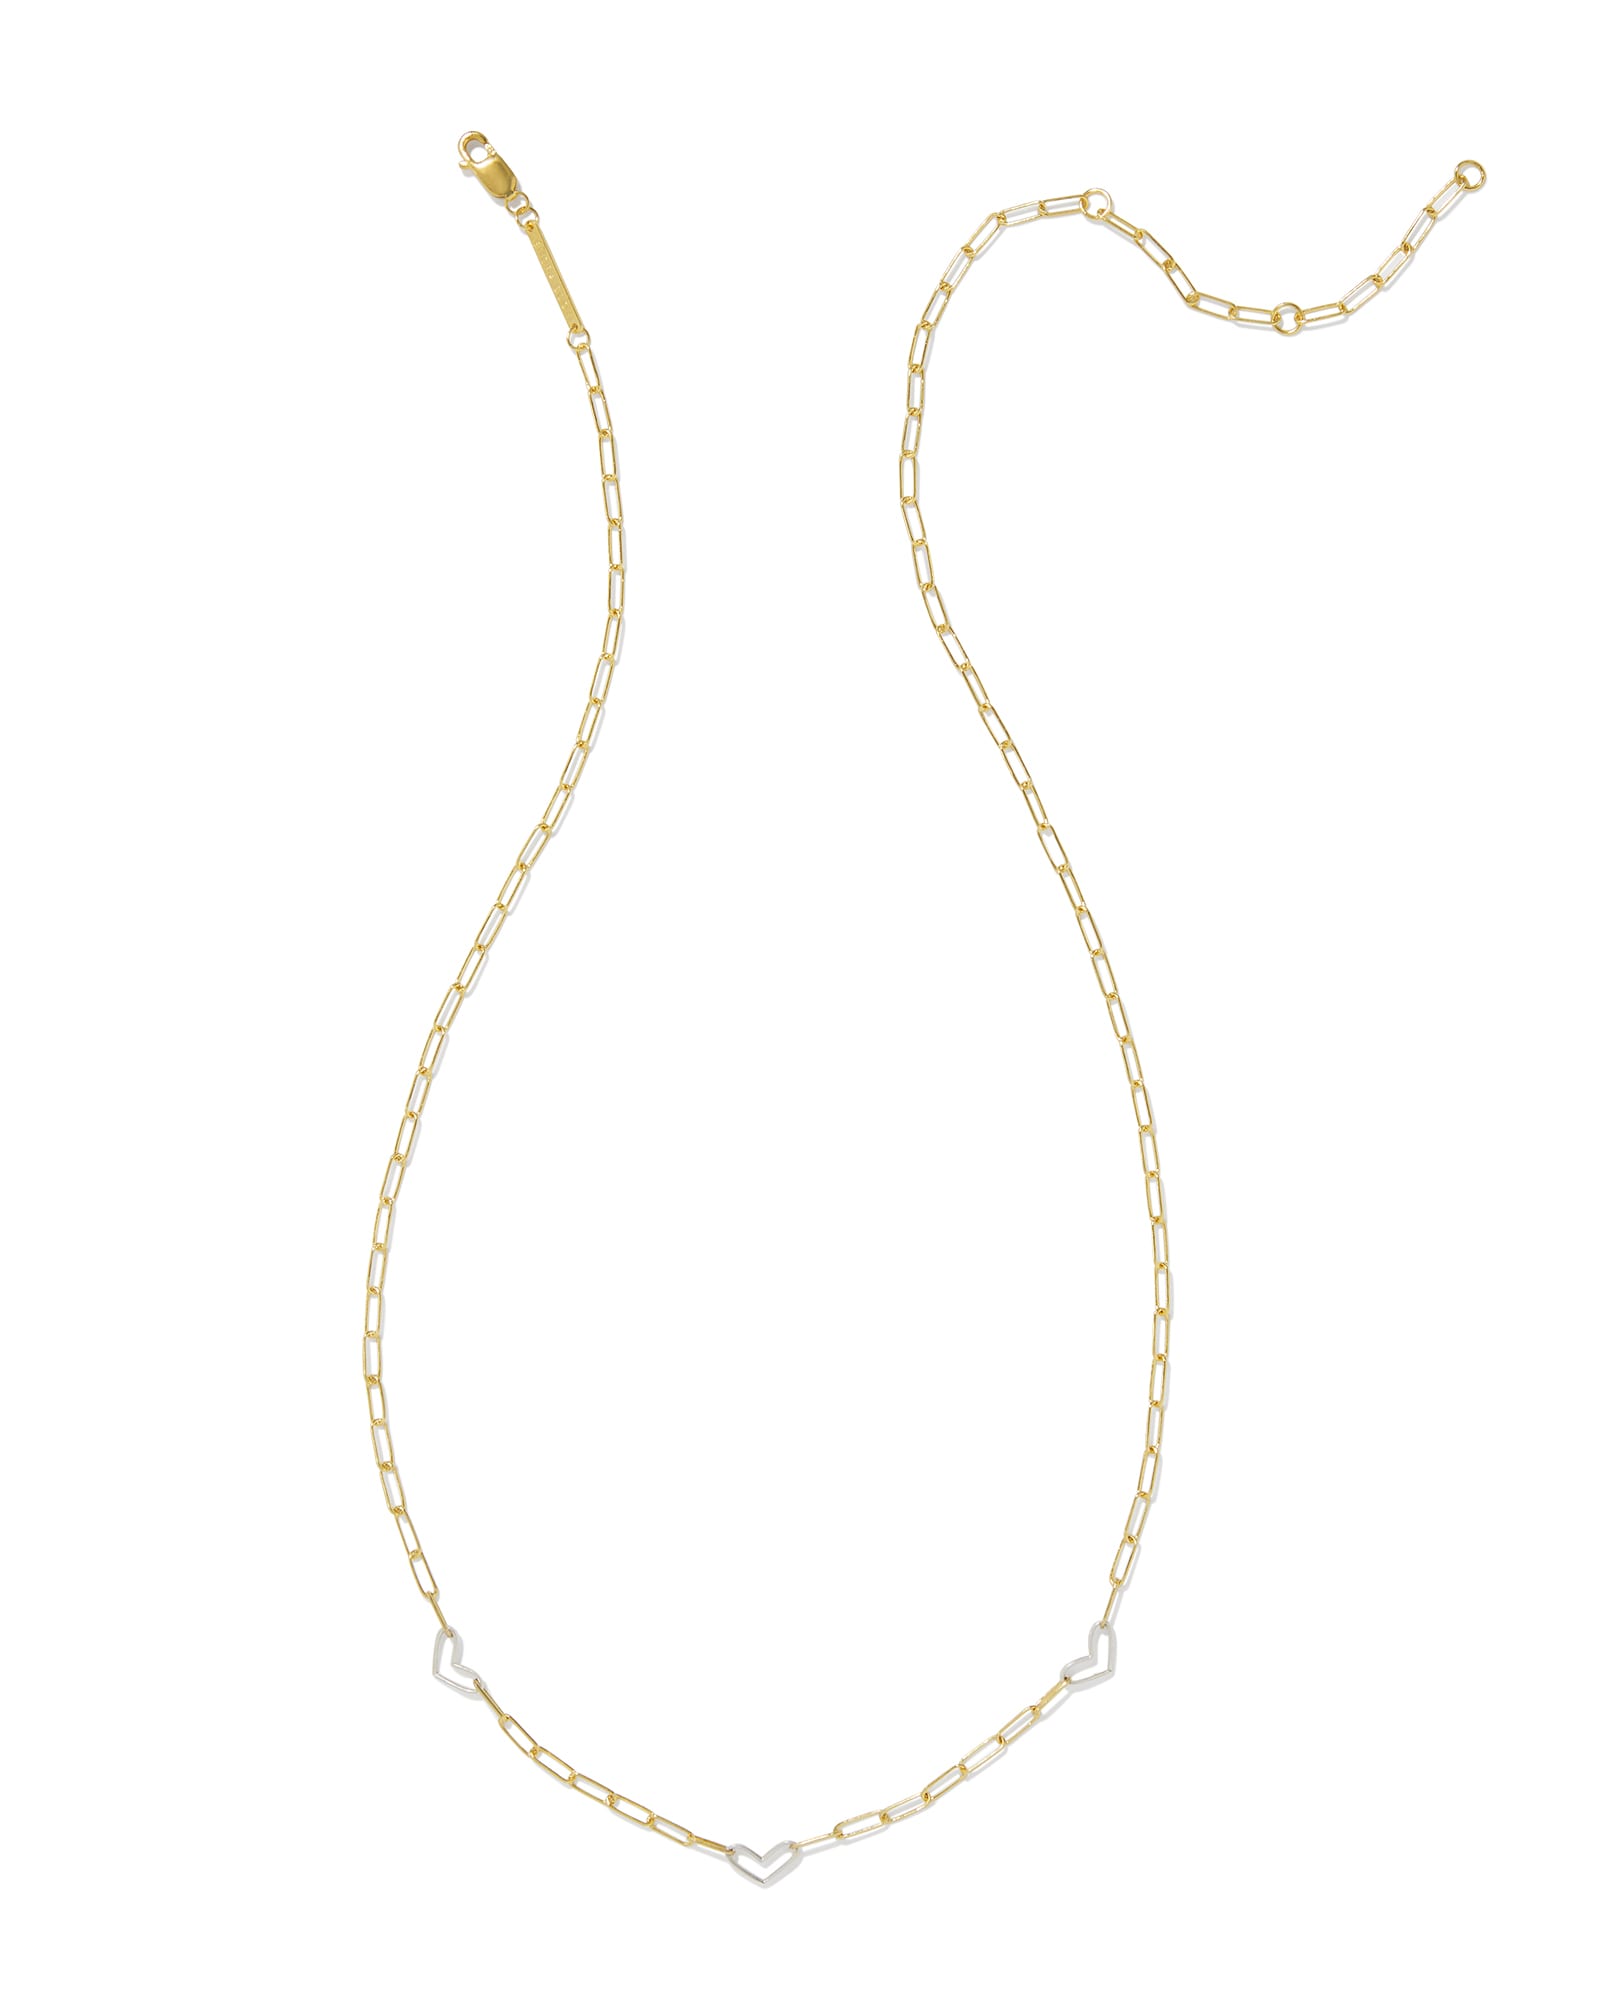 Kynlee Chain Necklace in Mixed Metal